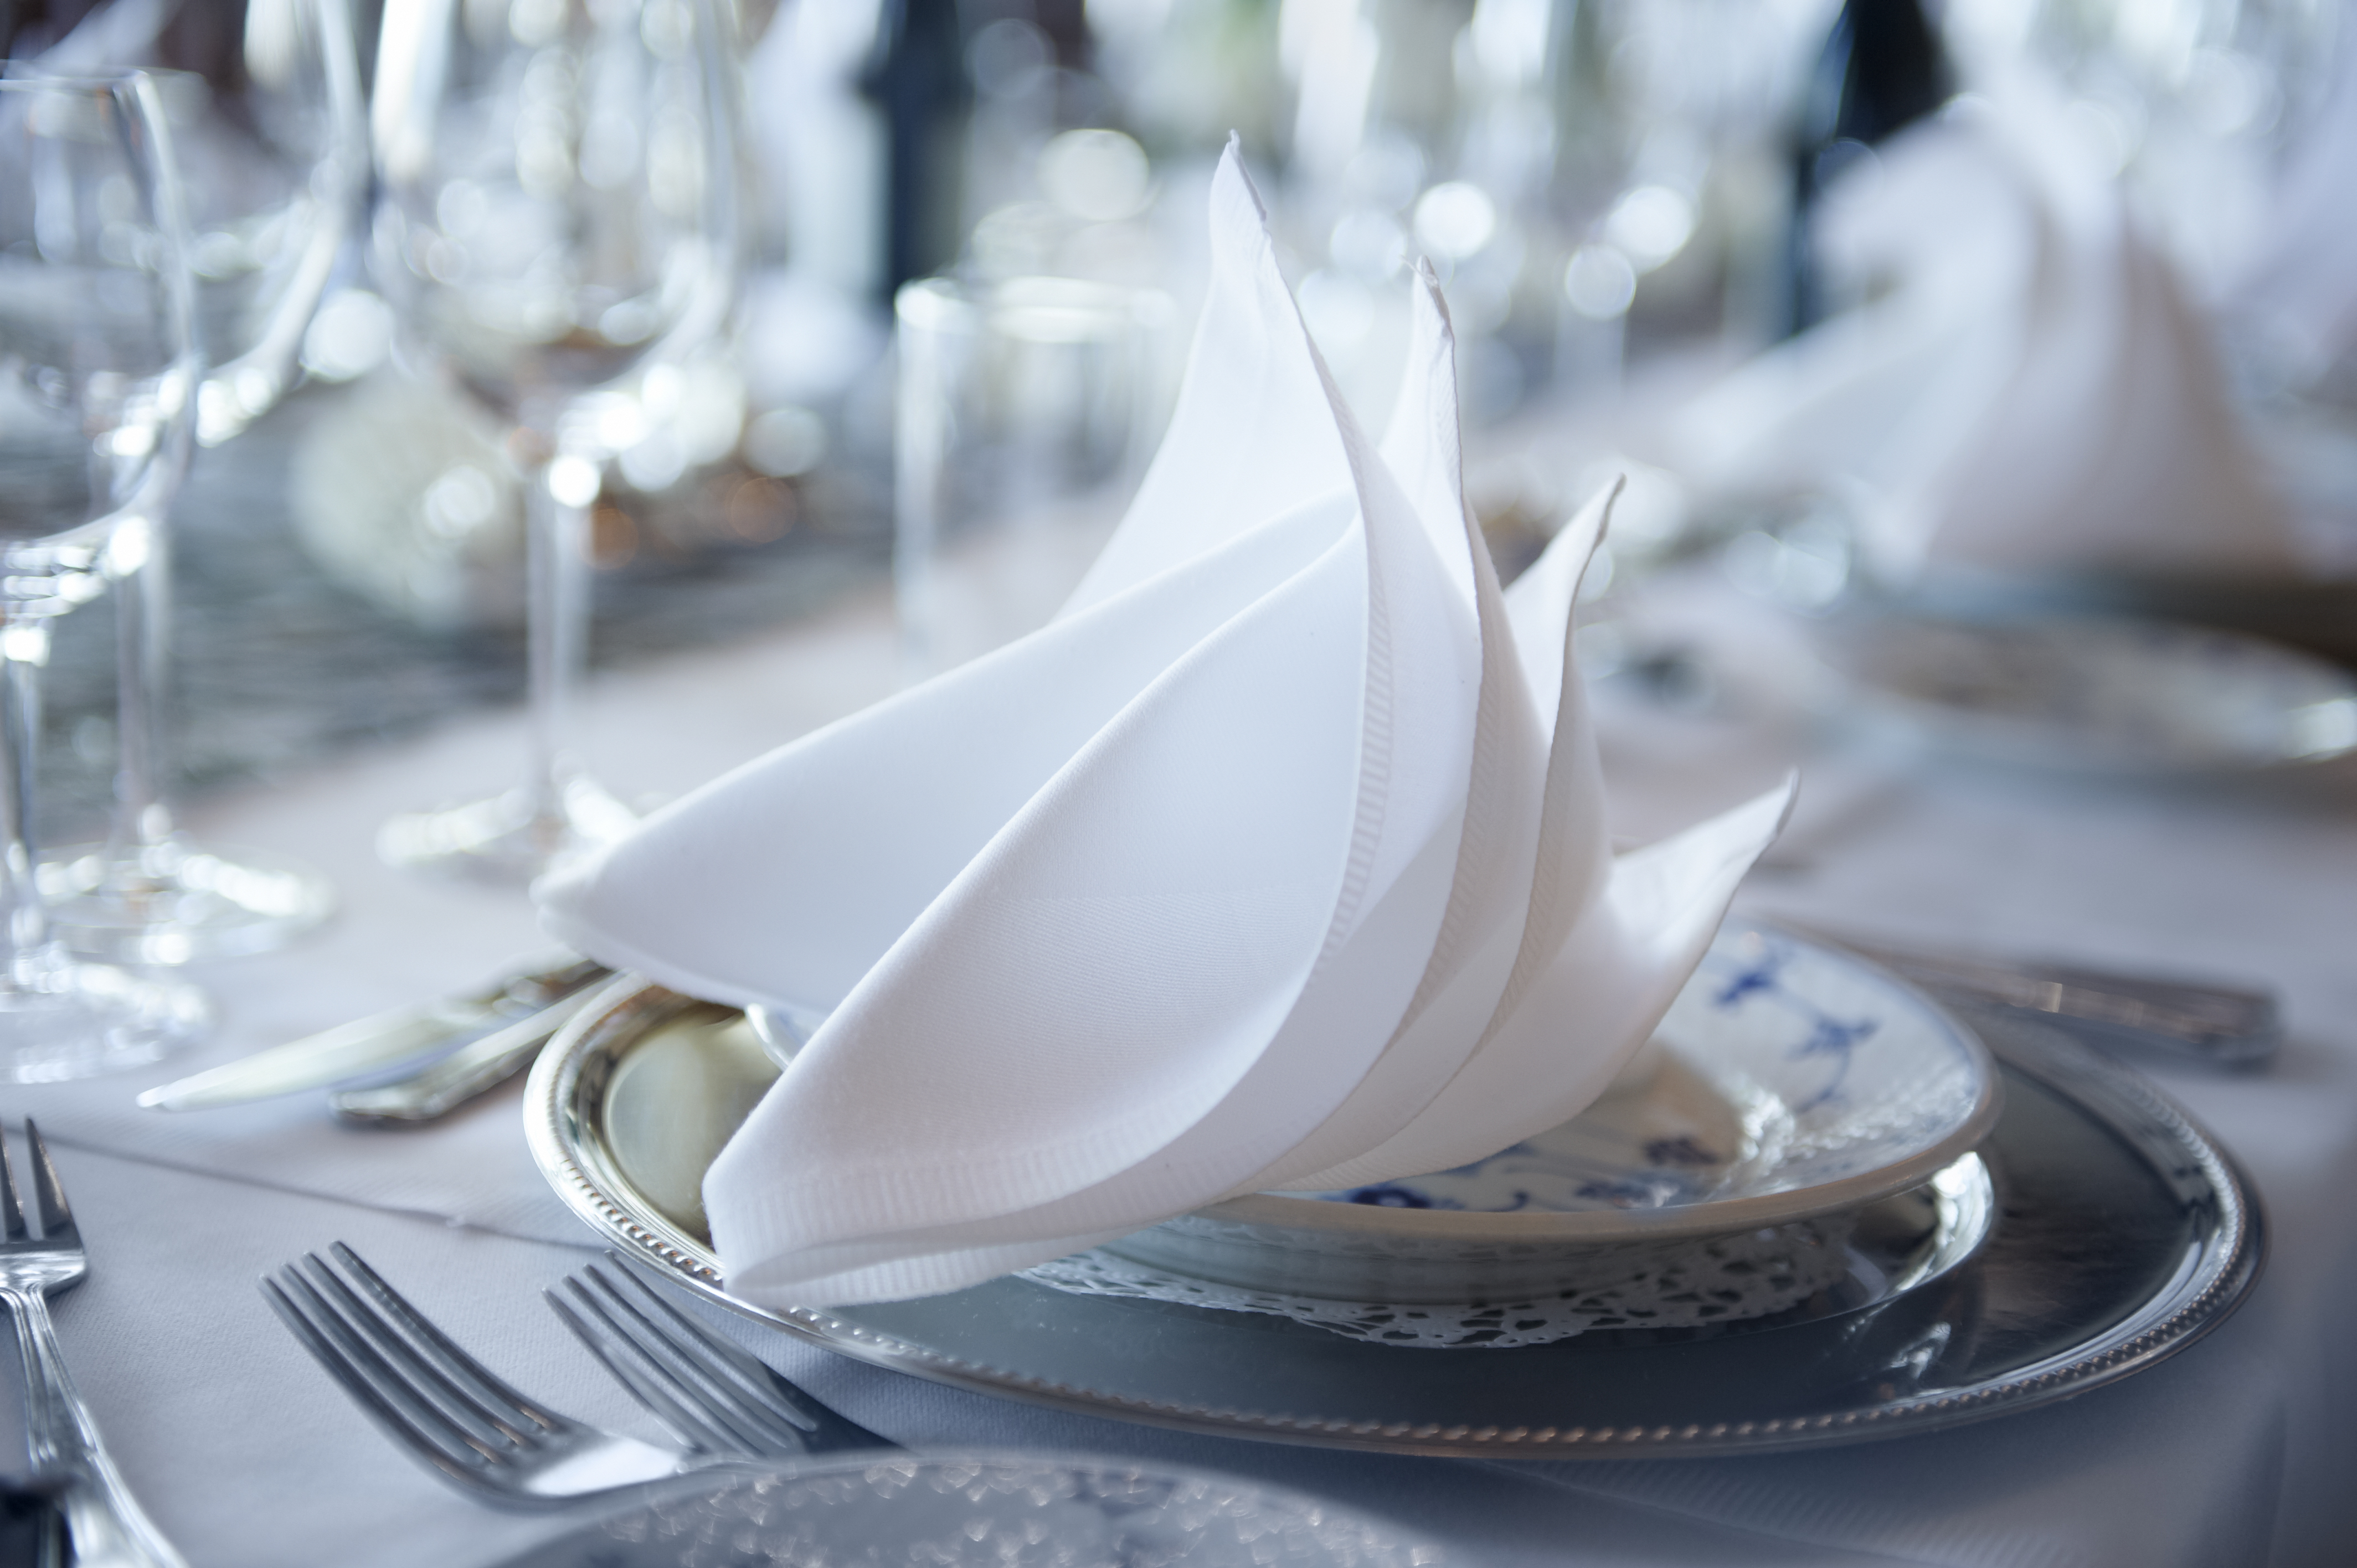 An origami napkin on a formal restaurant plate, with forks in the foreground and glasses in the background